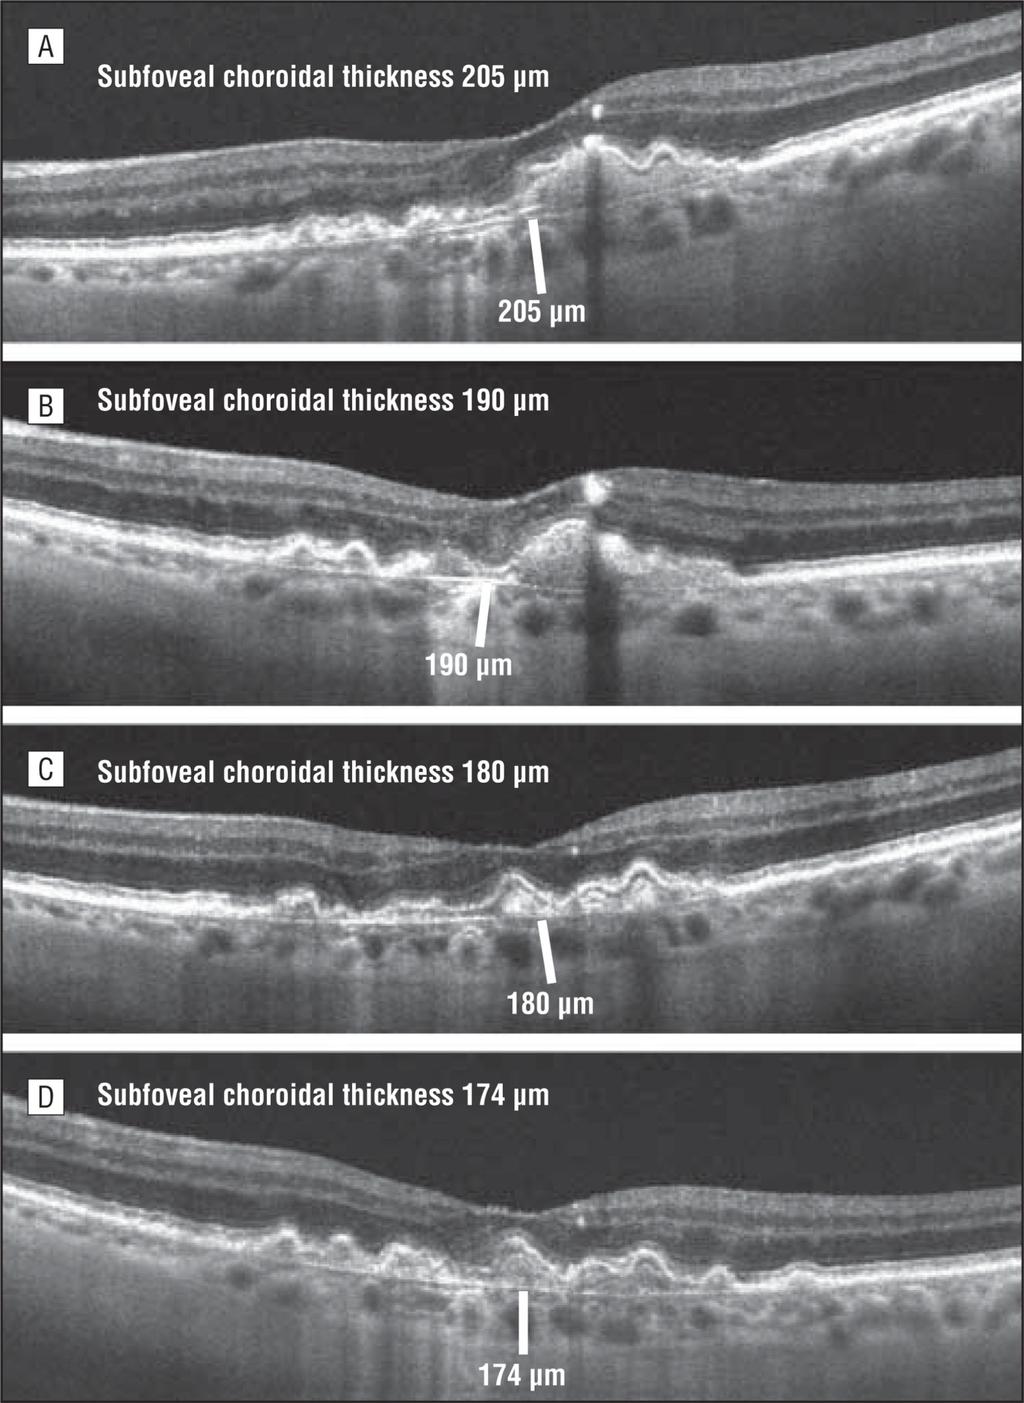 Branchini et al. Page 4 Figure 1. Spectral-domain optical coherence tomographic scans showing choroidal thicknesses of the same subject at 4 different times.